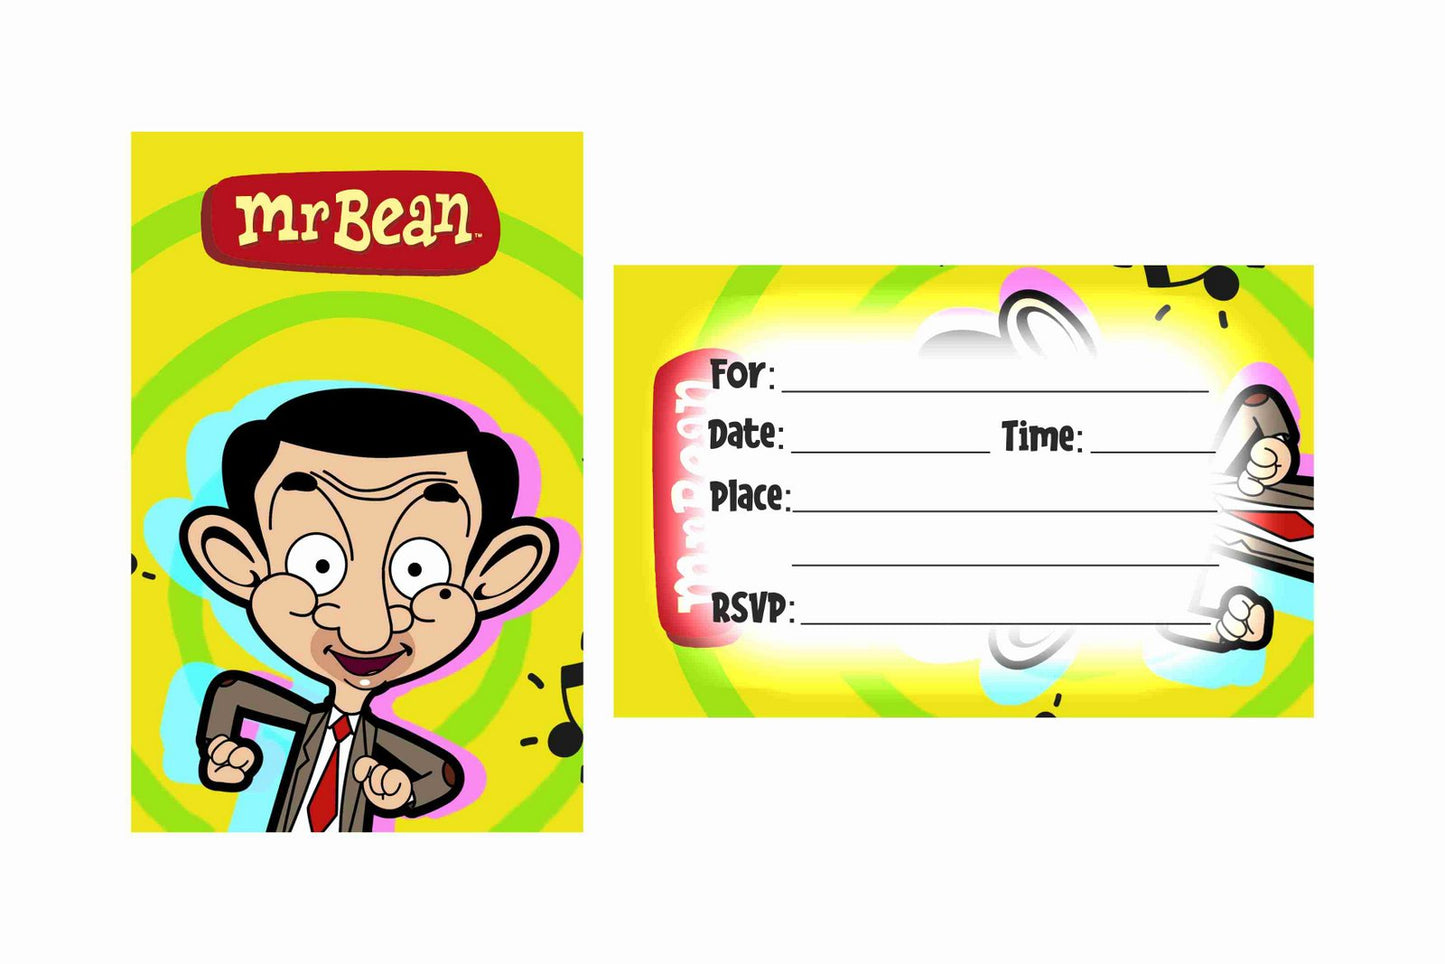 Mr Bean Theme Children's Birthday Party Invitations Cards with Envelopes - Kids Birthday Party Invitations for Boys or Girls,- Invitation Cards (Pack of 10)